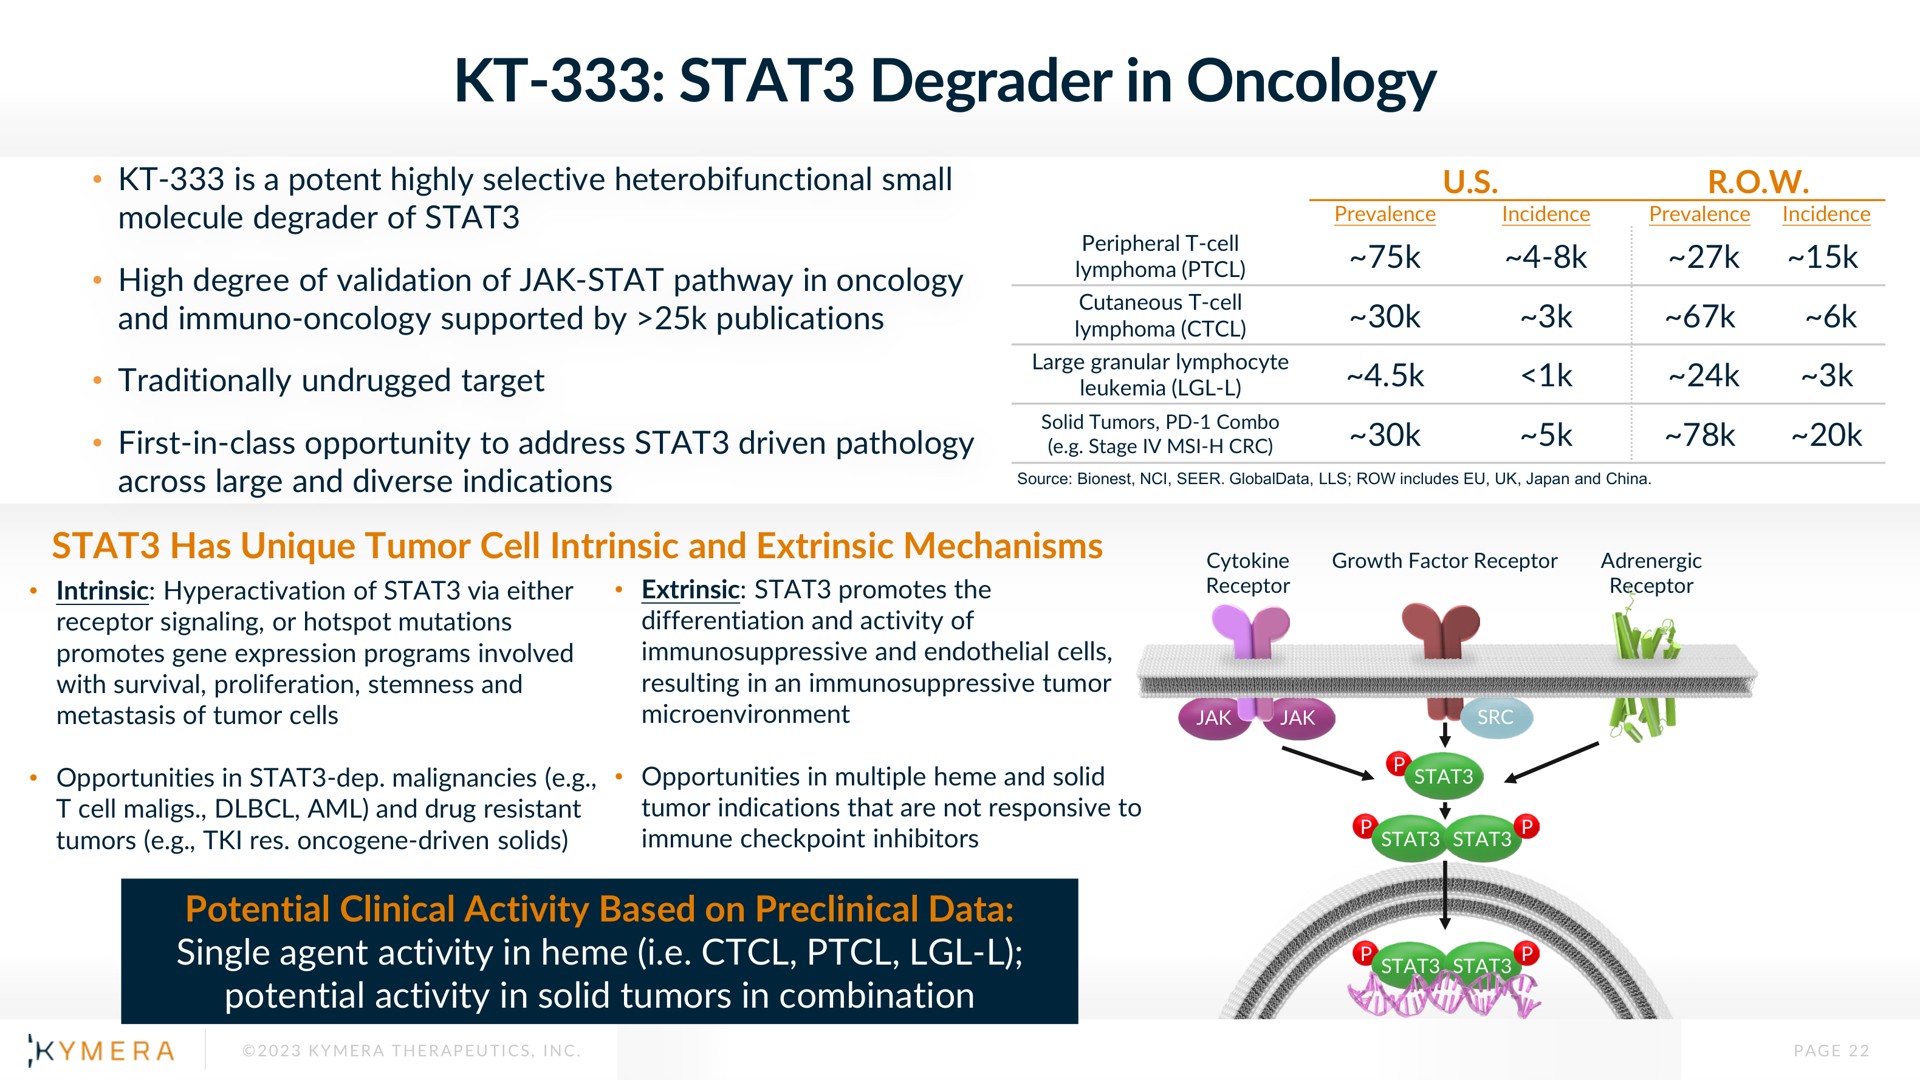 degrader in oncology | Kymera